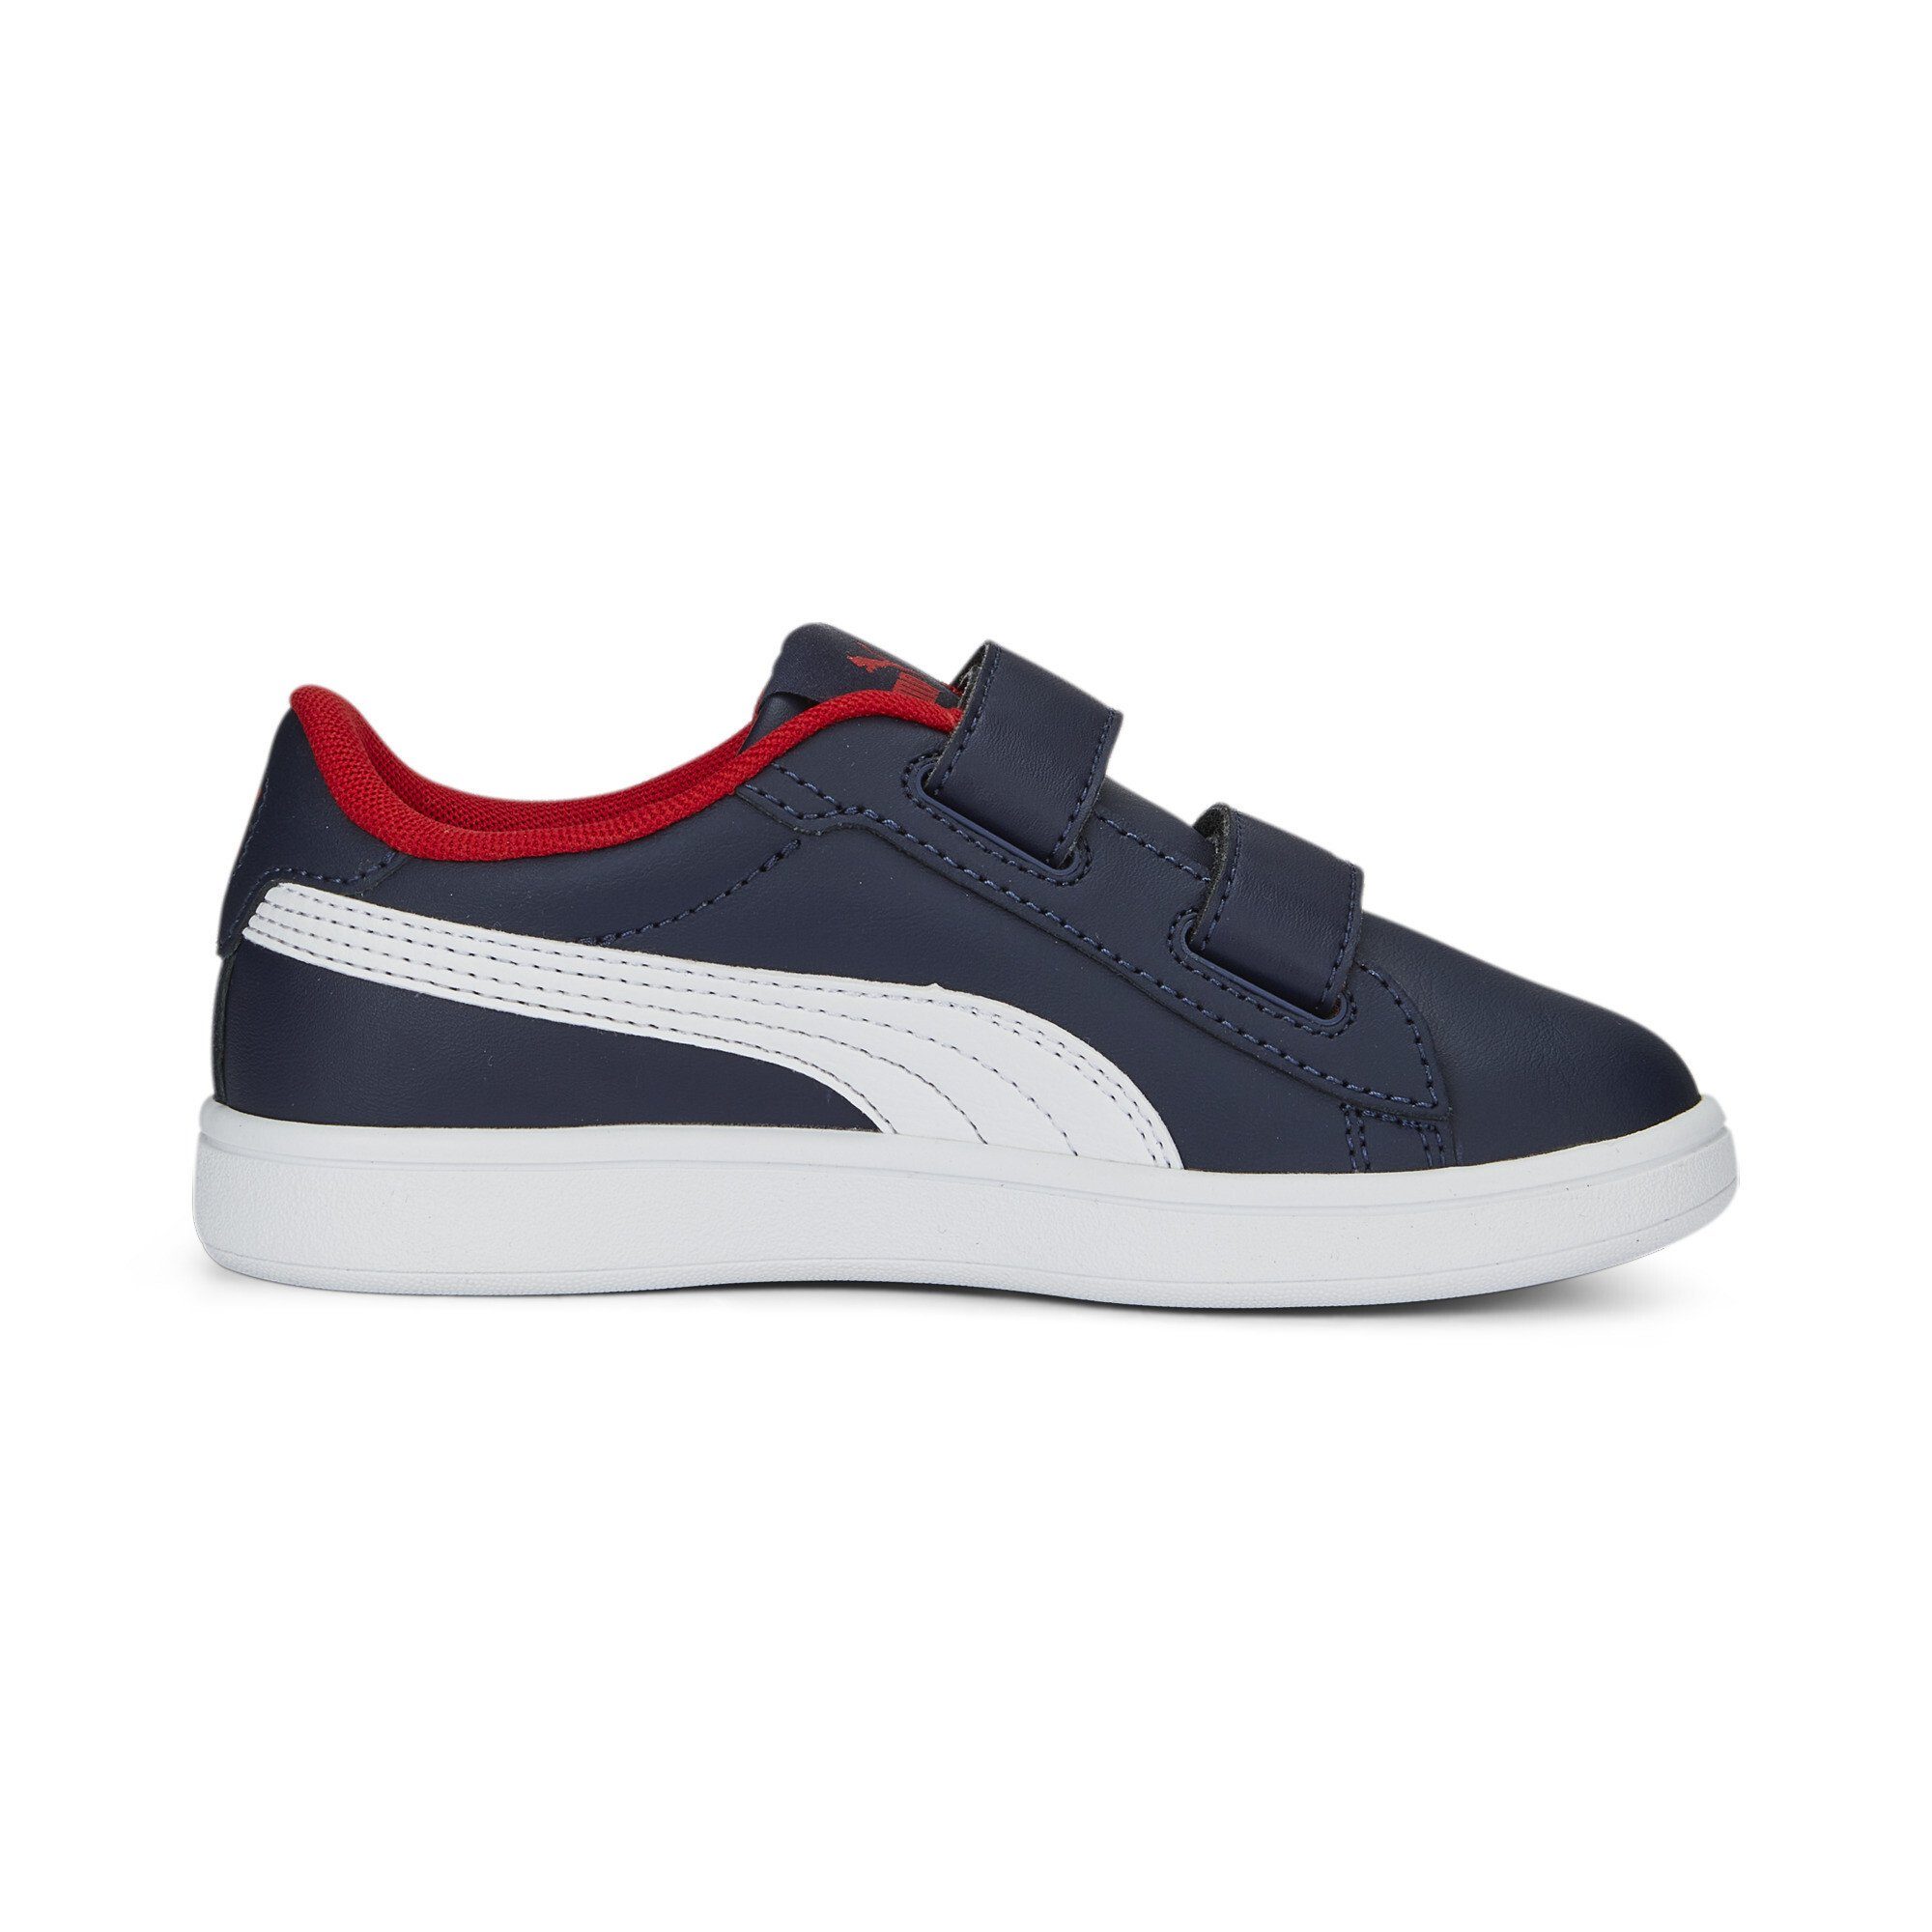 PUMA Smash Sneakers Sneaker All Red Navy For 3.0 Blue White Time Leather